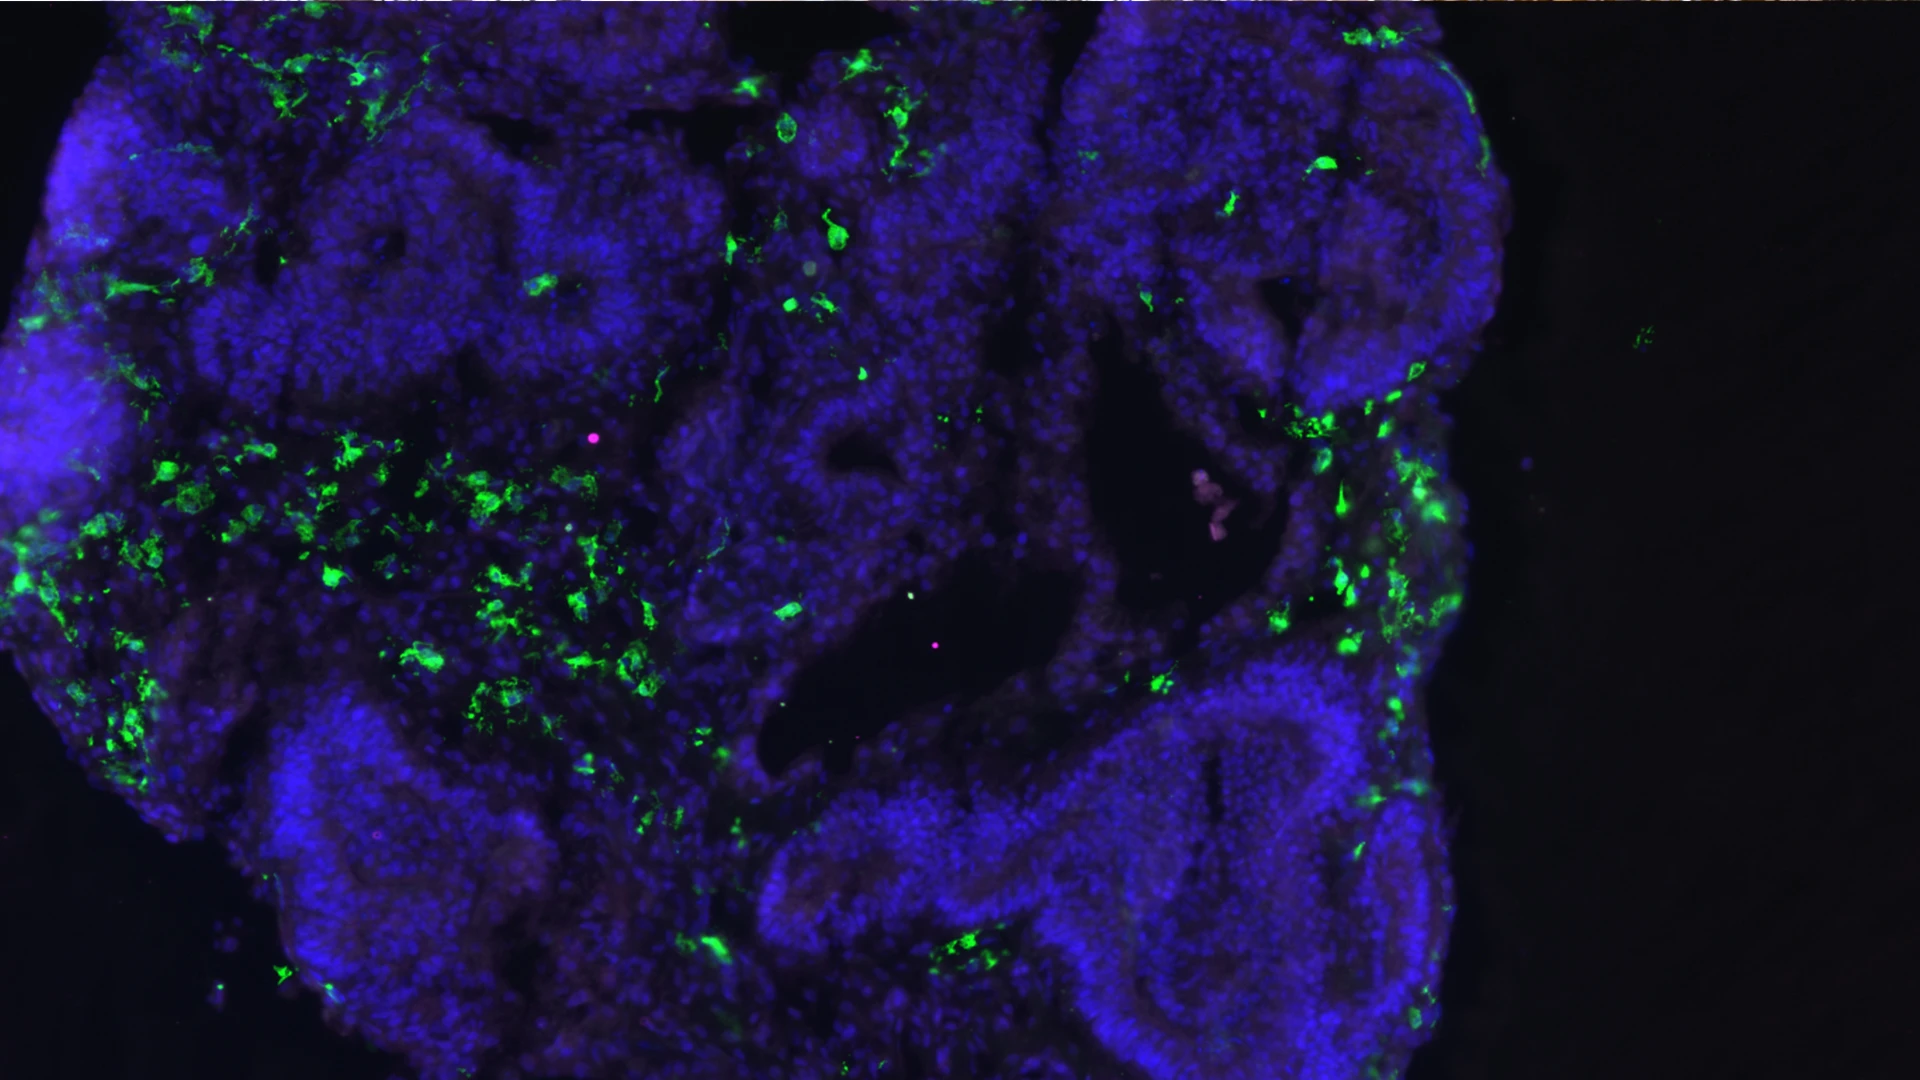 An organoid from Dr. De Witte’s lab, with the microglia shown in green. Image courtesy of Ormel PR et al., via Nature Communications.